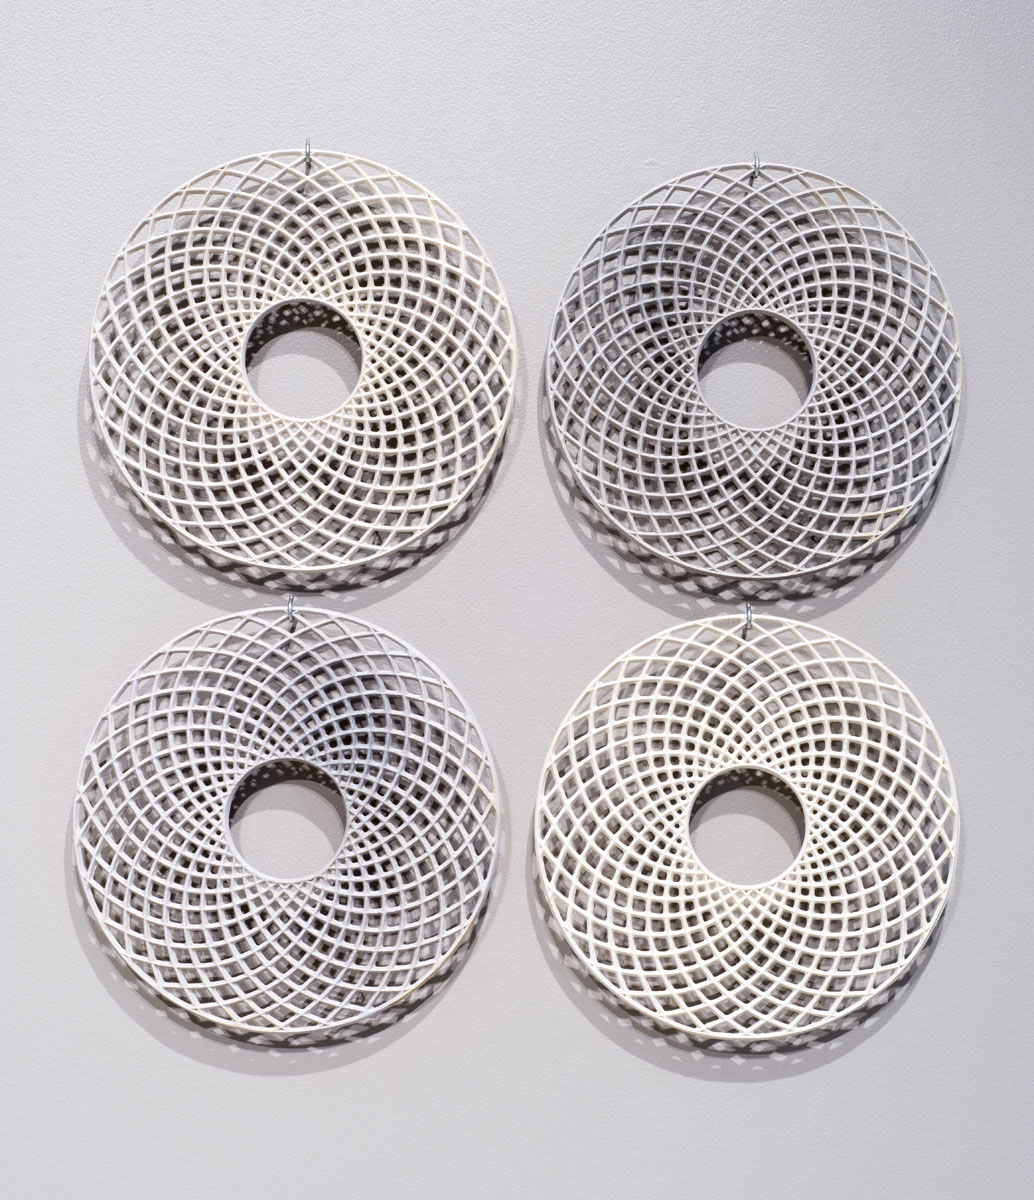 Squaring the Circle (Tile Version), Stoneware, Cone 6, 16 x 16 x 0.5 in